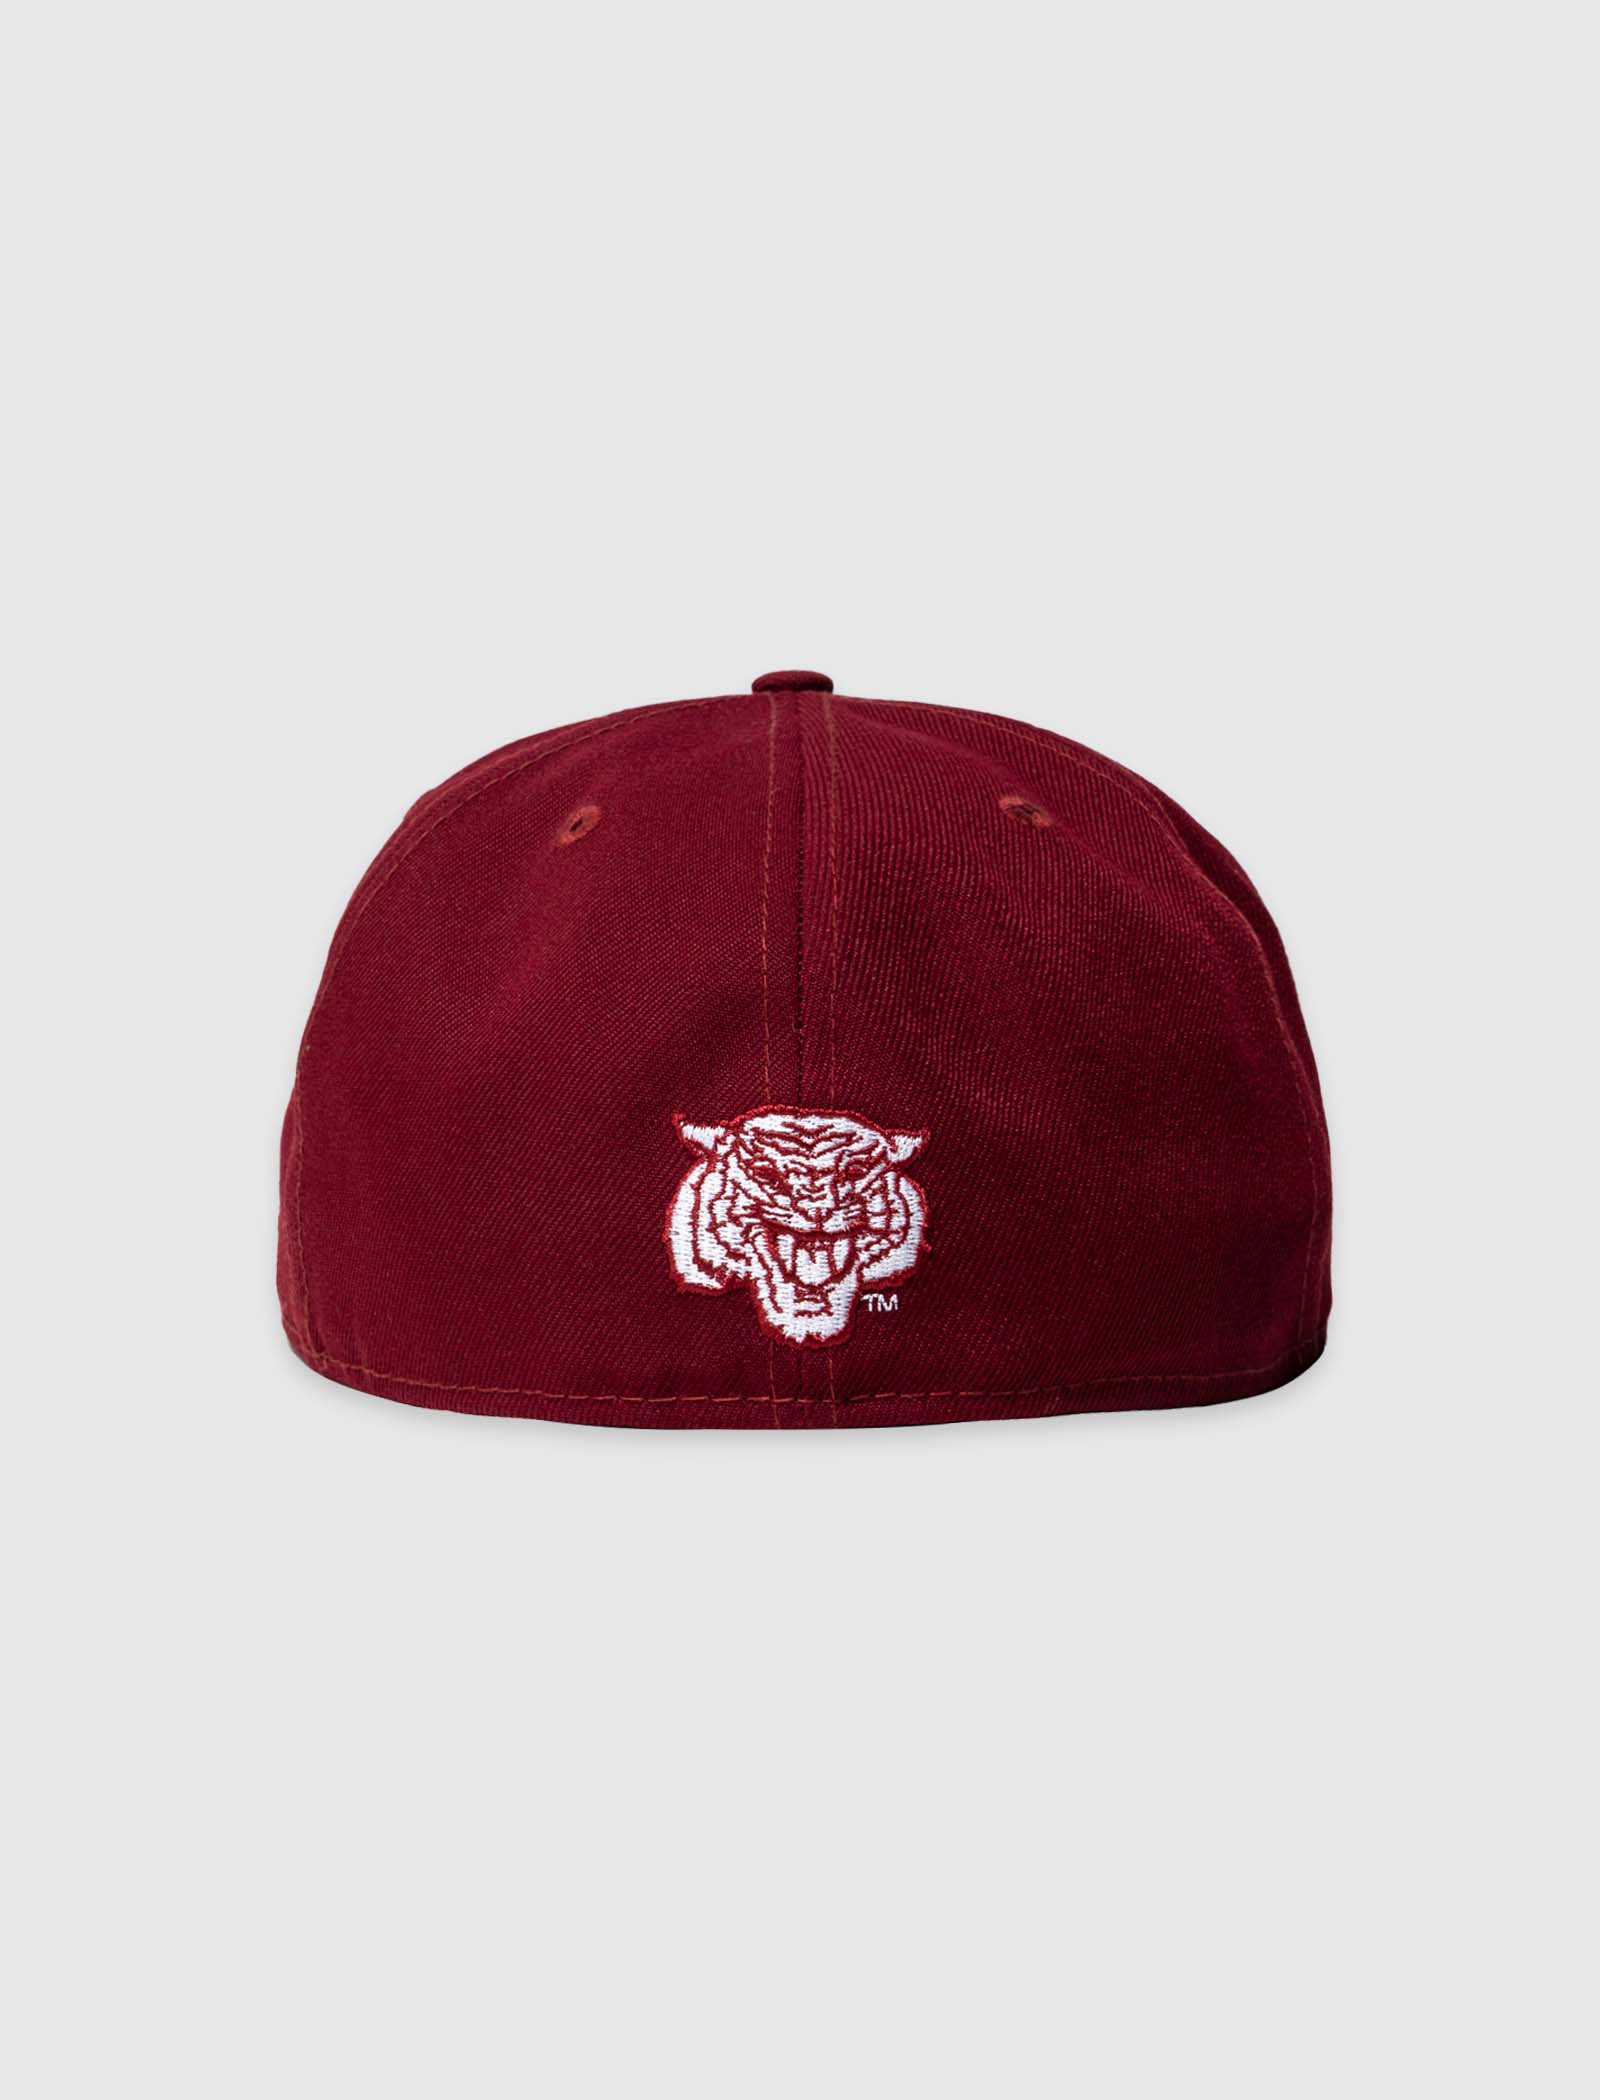 Pro Standard Morehouse Maroon Tigers White Evergreen Wool Snapback Hat